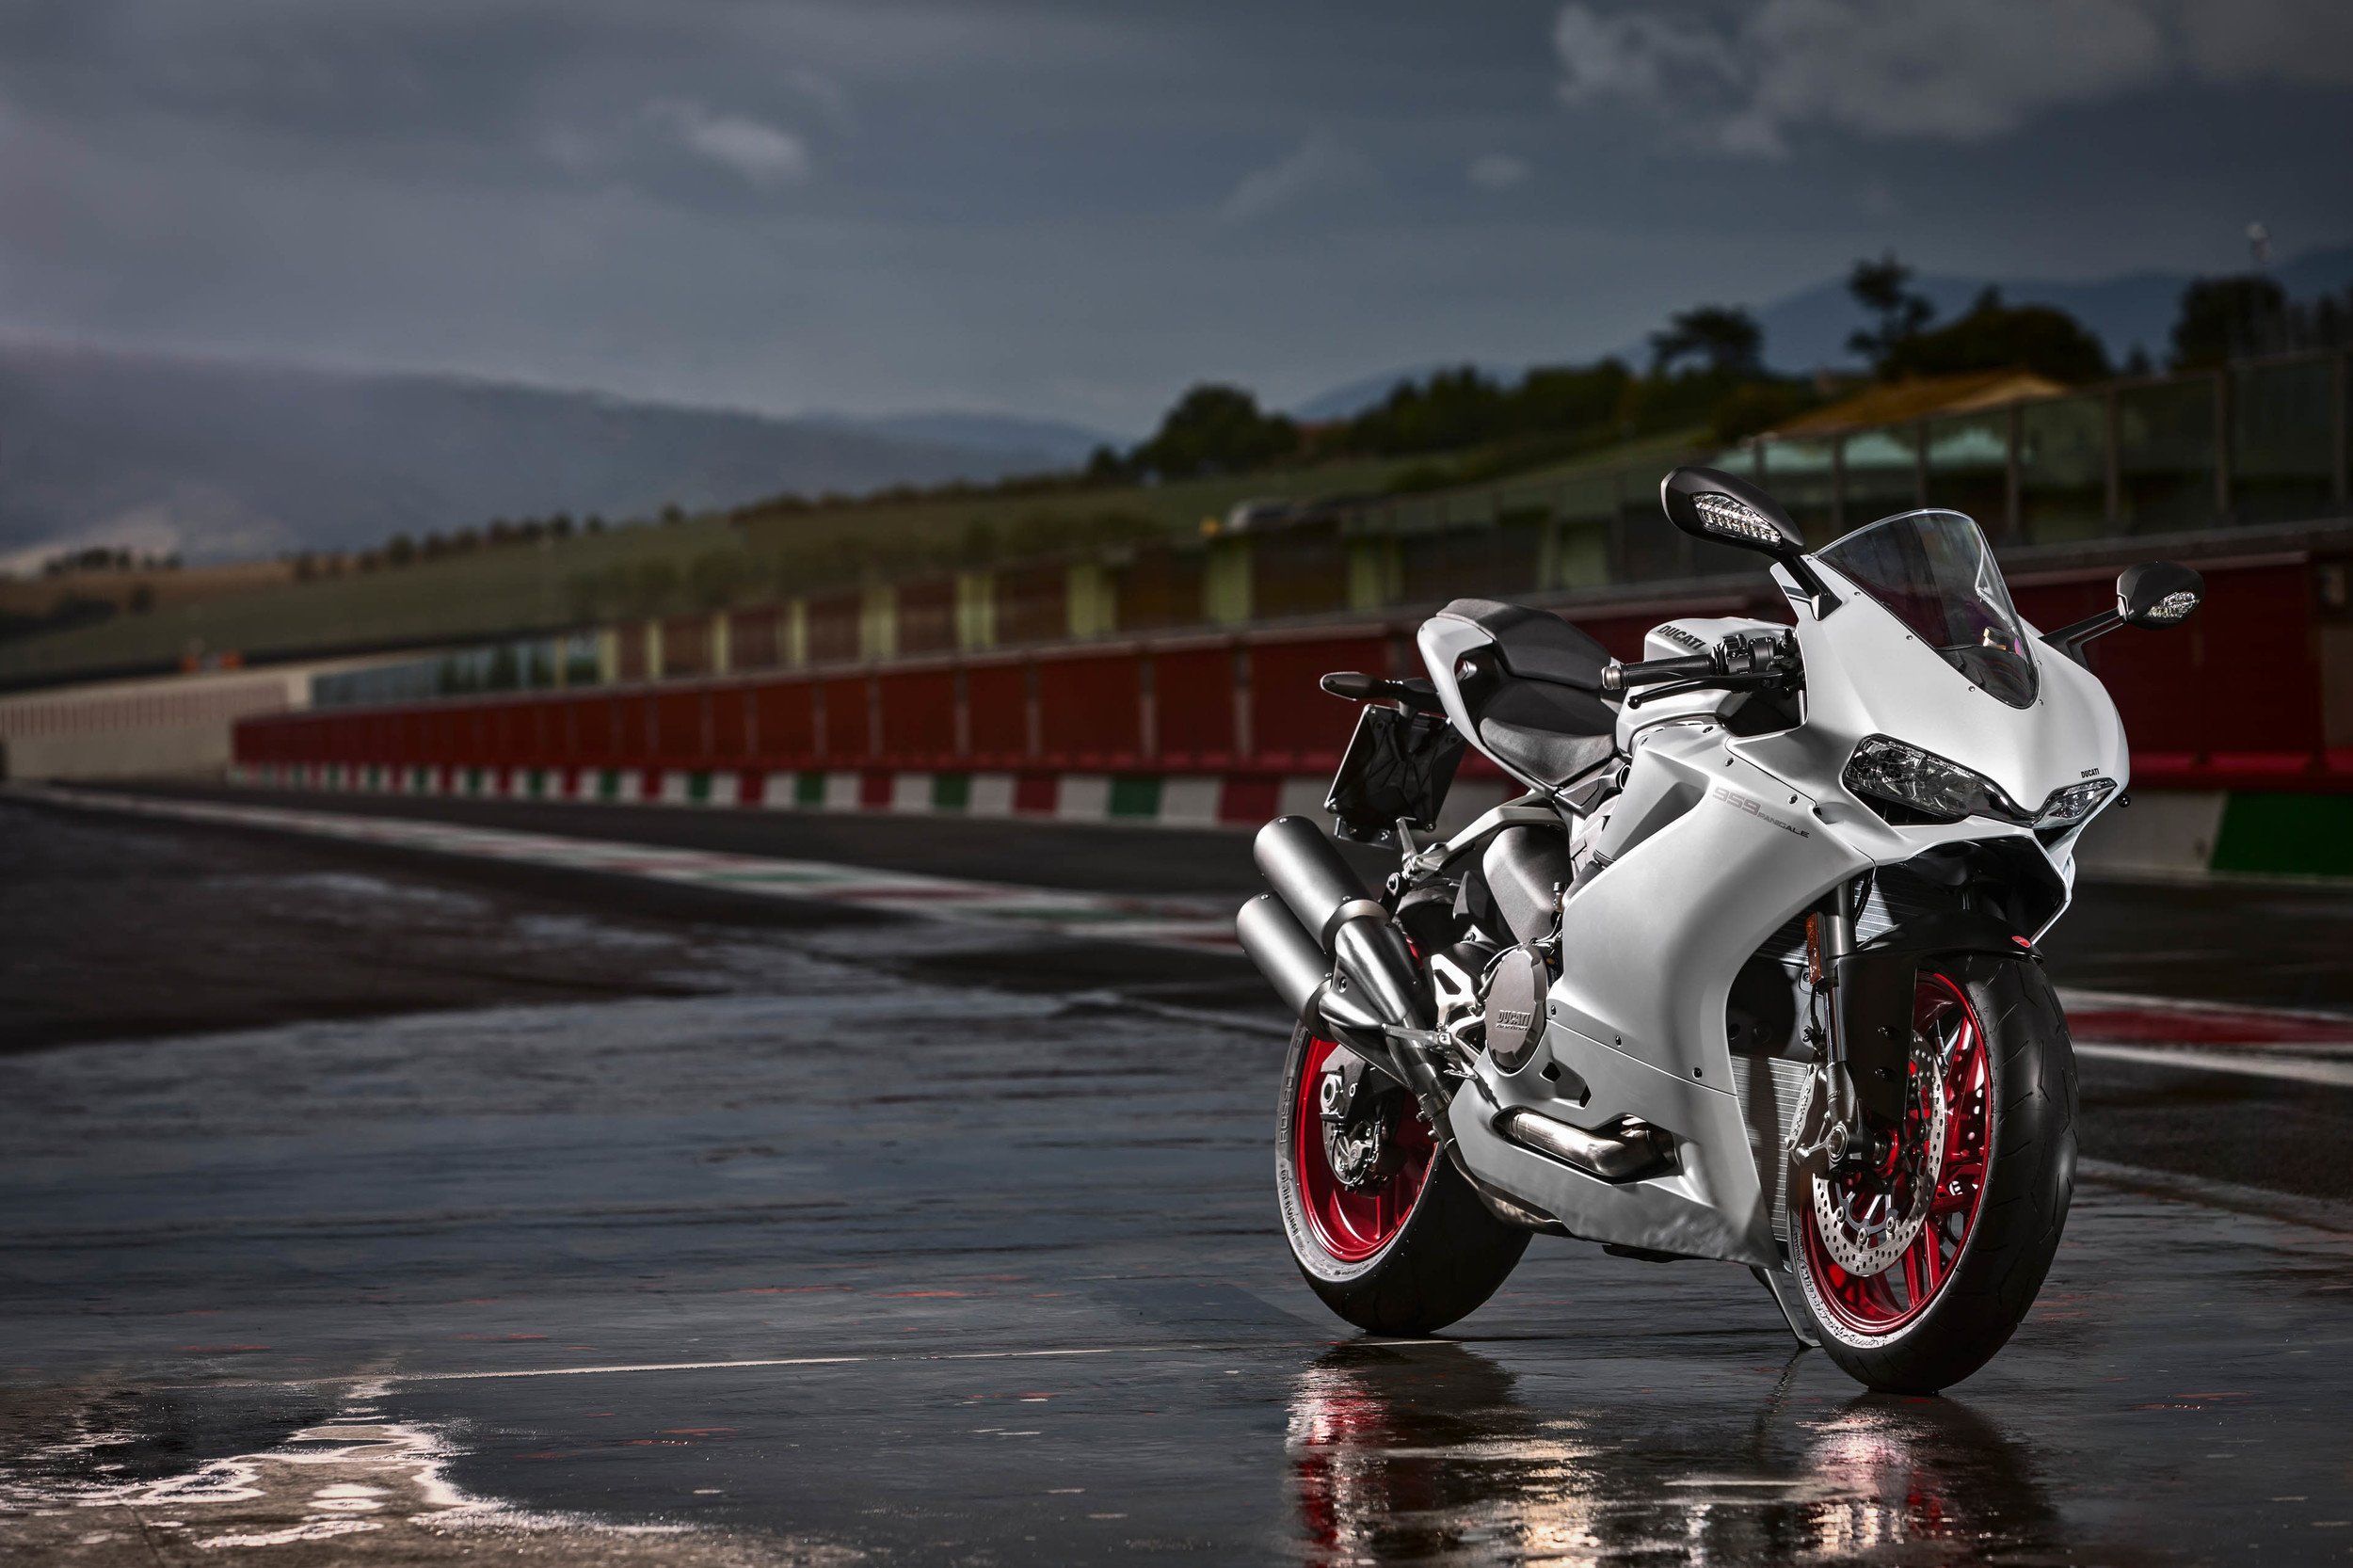 Ducati Panigale 959 2016 motocycles wallpaper | 2500x1666 | 838471 ...